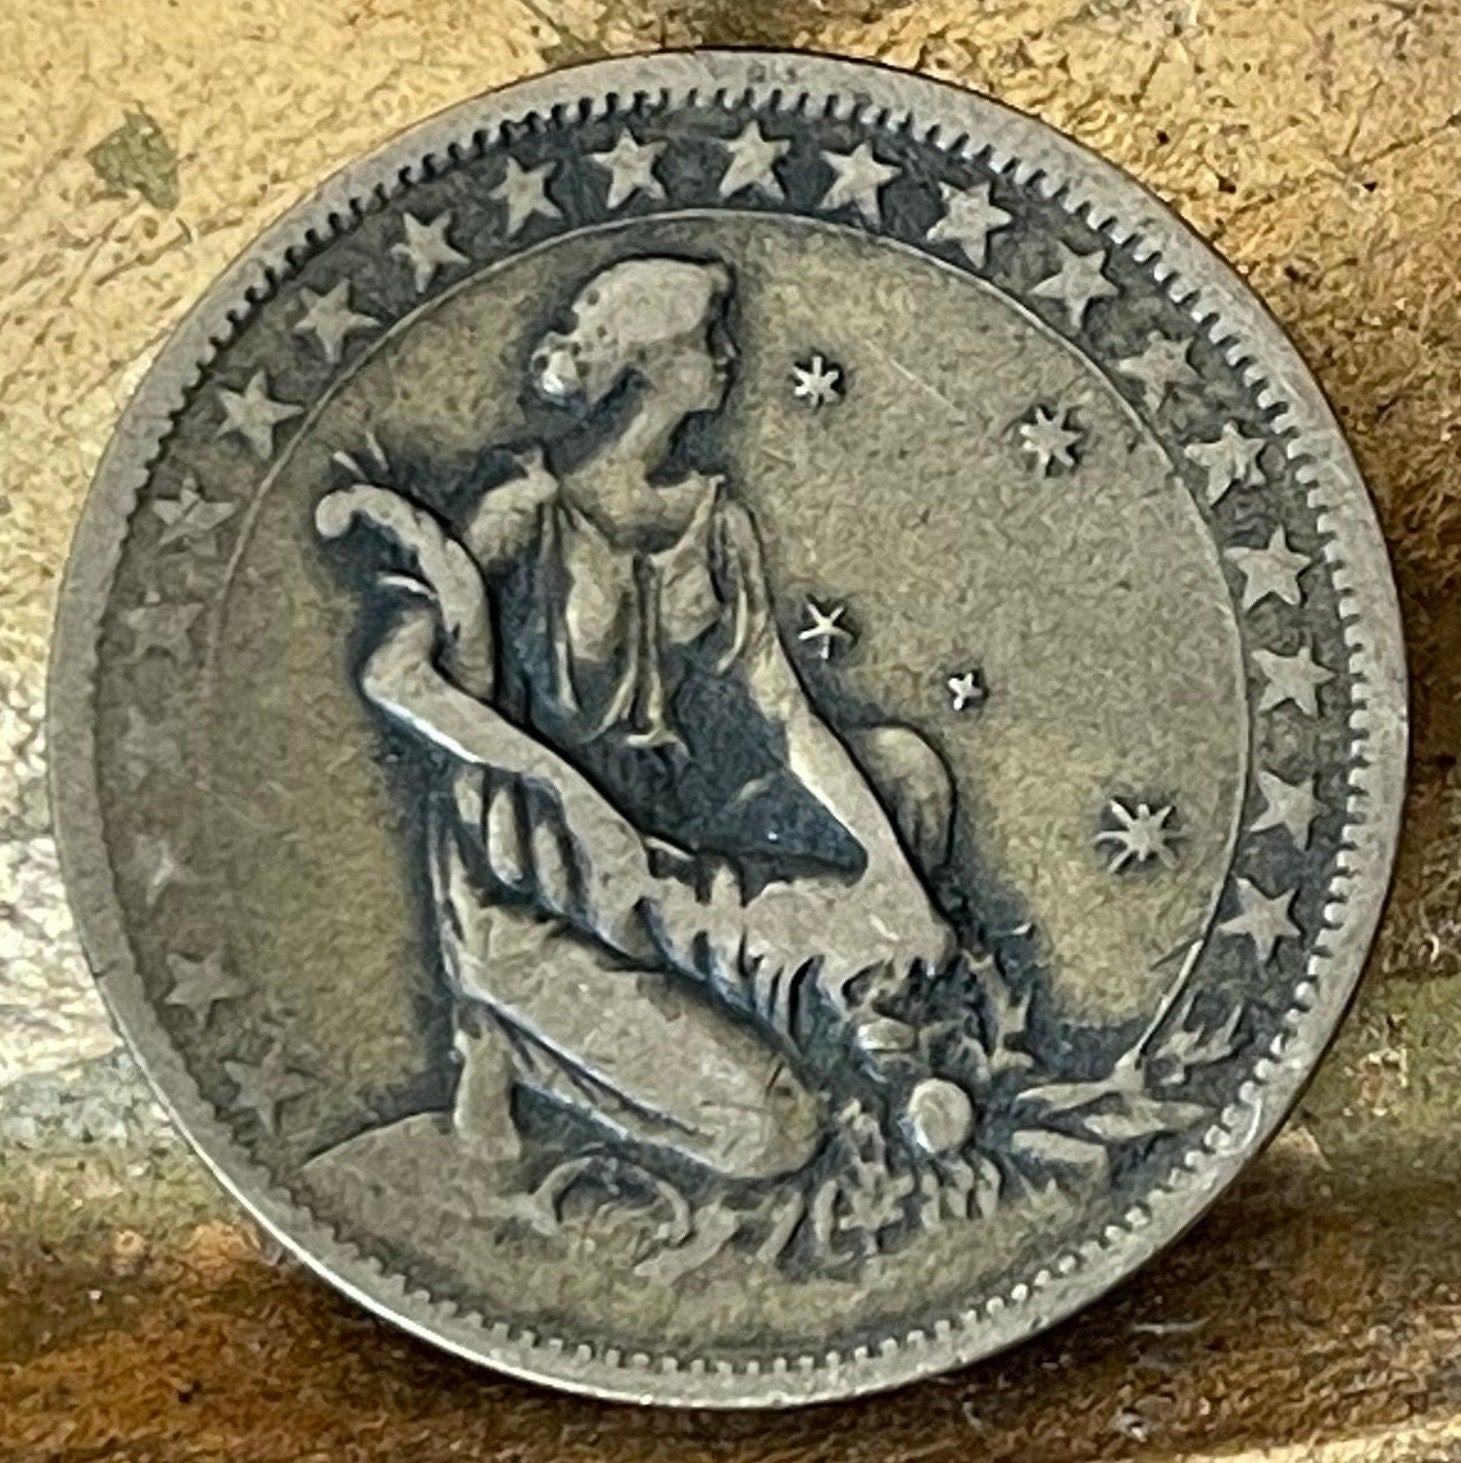 Goddess Abundantia with Cornucopia & Southern Cross Constellation 1000 Réis Brazil Authentic Coin Money for Jewelry and Craft Making (Crux)